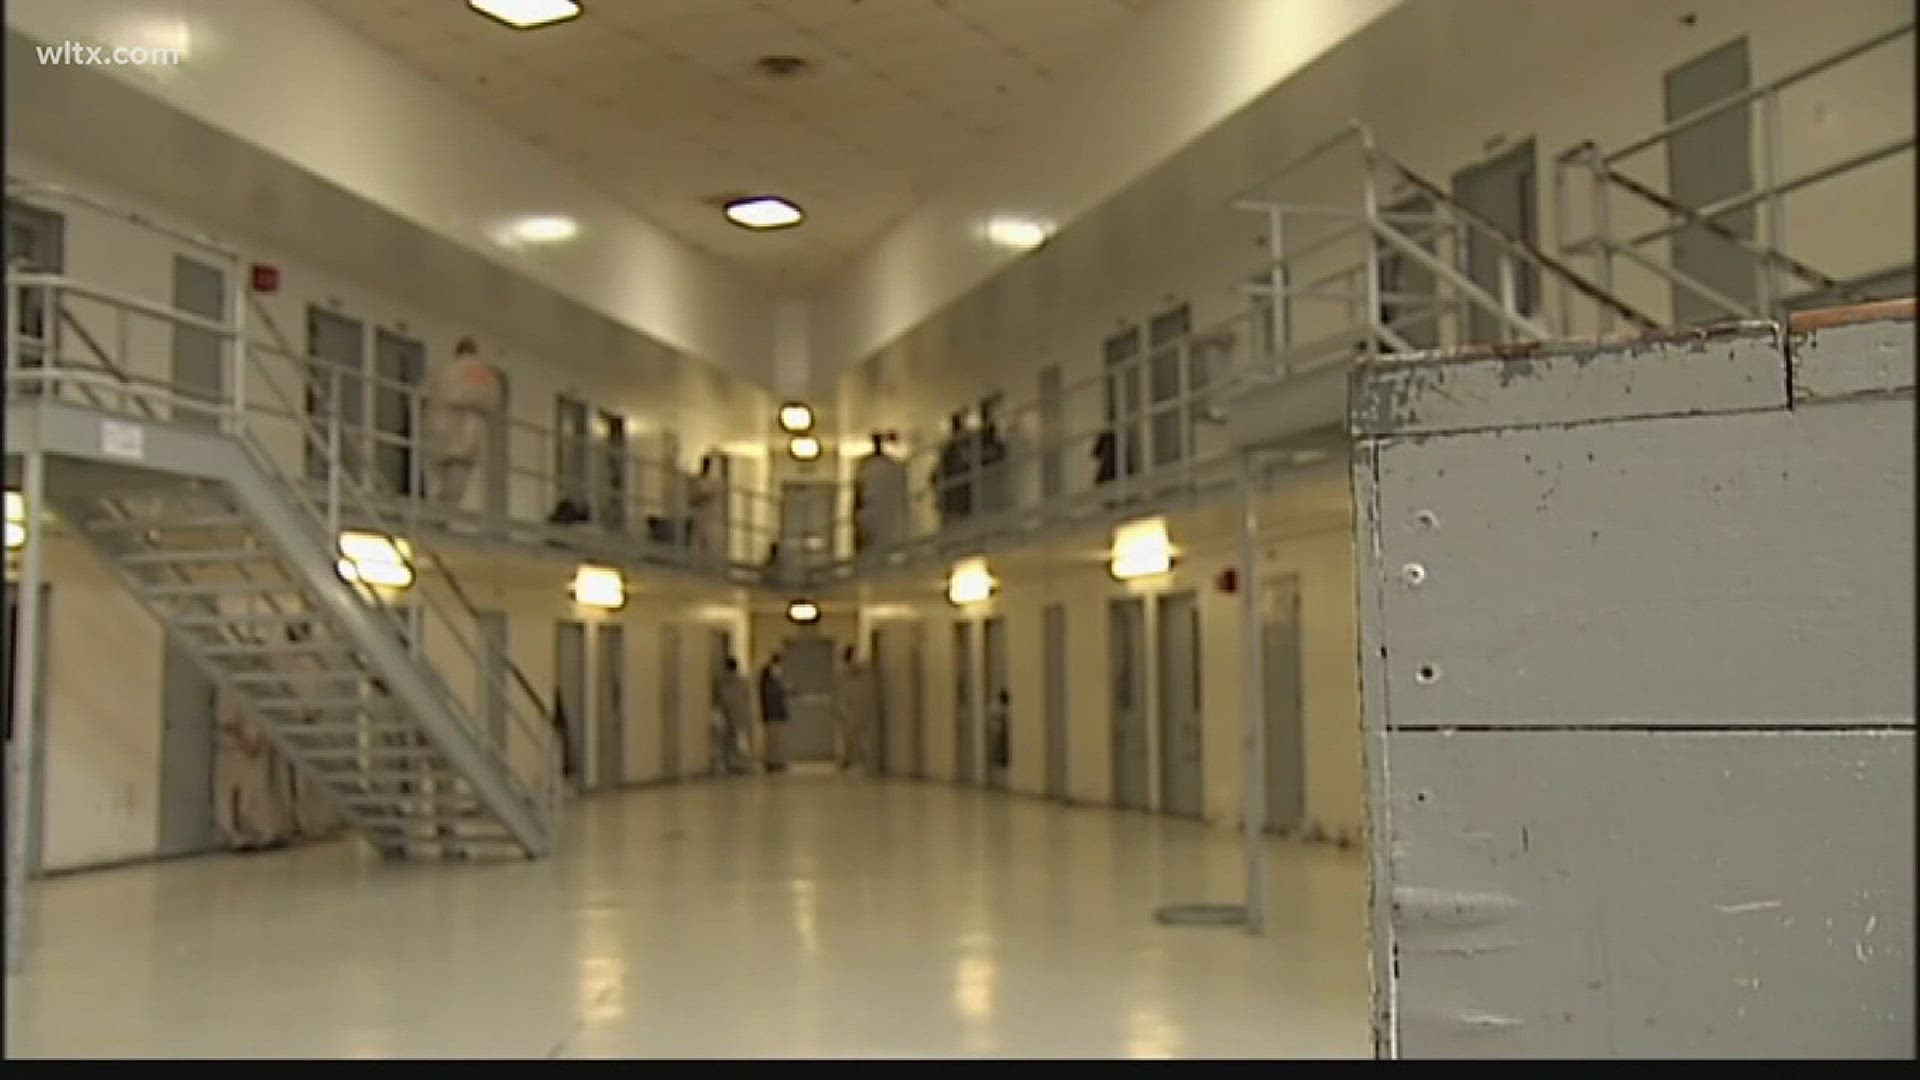 The electric chair has been an option for inmates, but would now be used more often under  this new proposal.